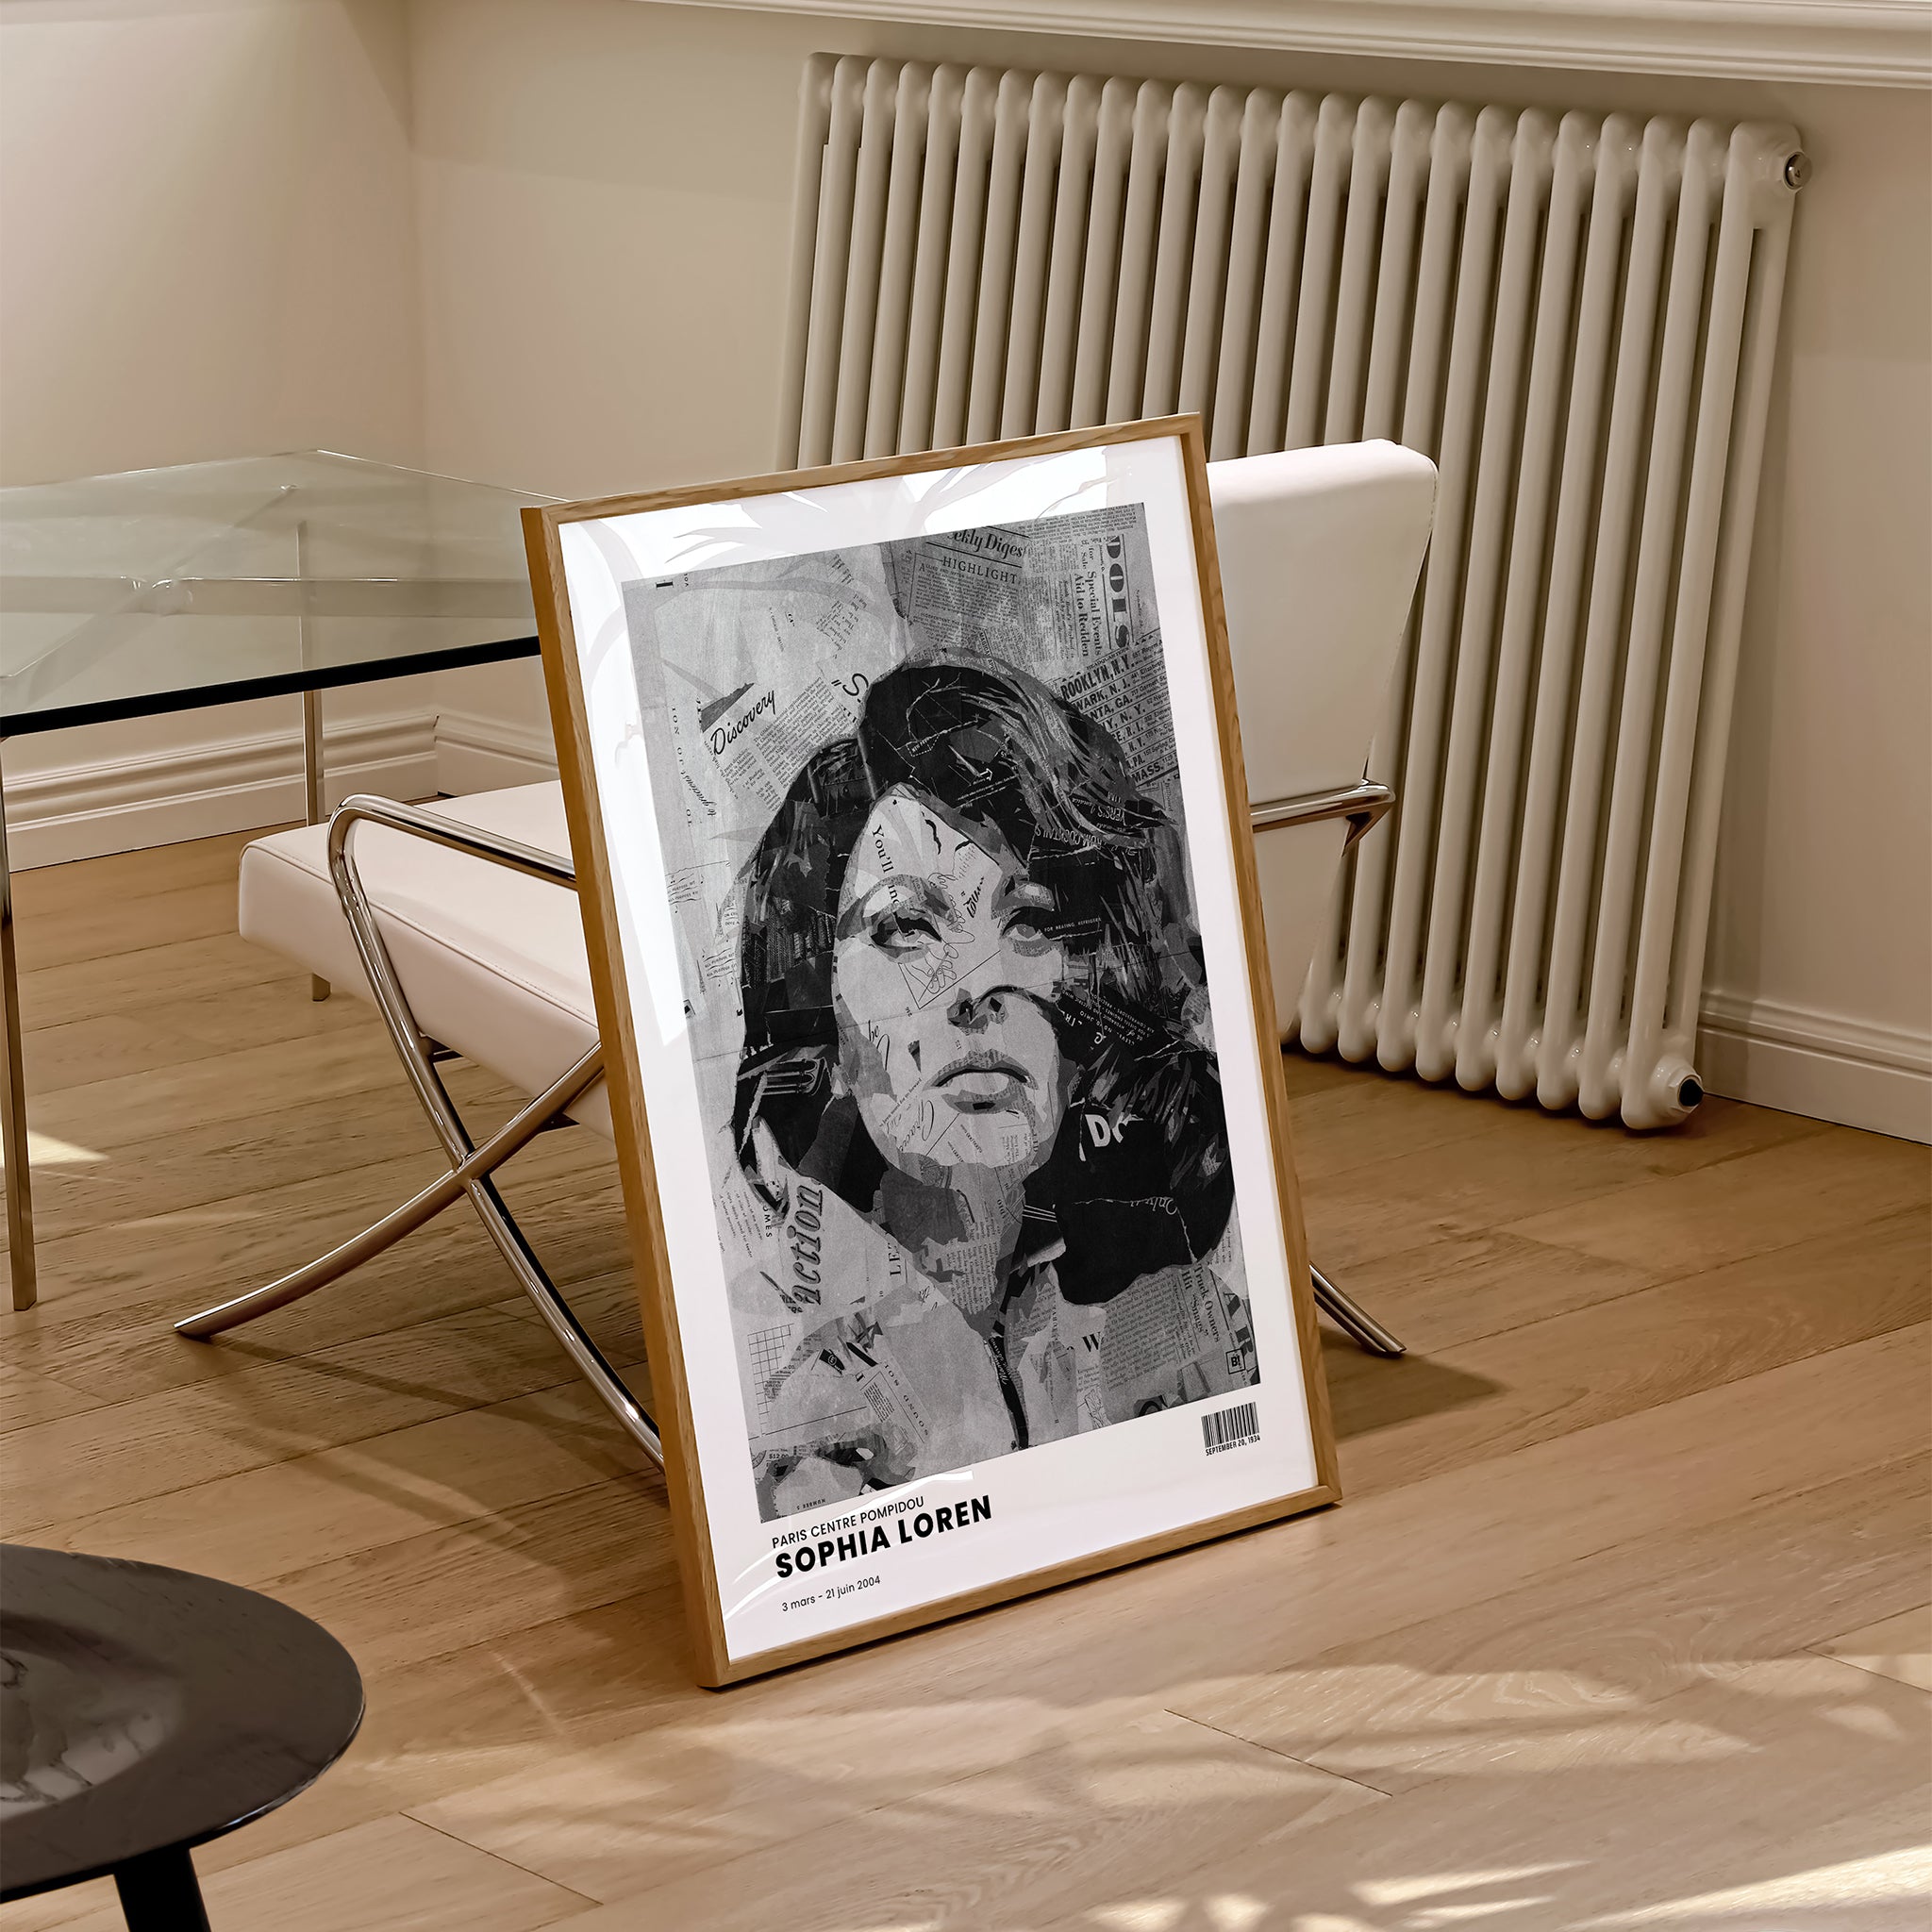 Be inspired by Iconic Sophia Loren Paris Centre Pompidou Exhibition Art Print. The artwork is presented in a natural wood frame that captures its timeless beauty in every detail.